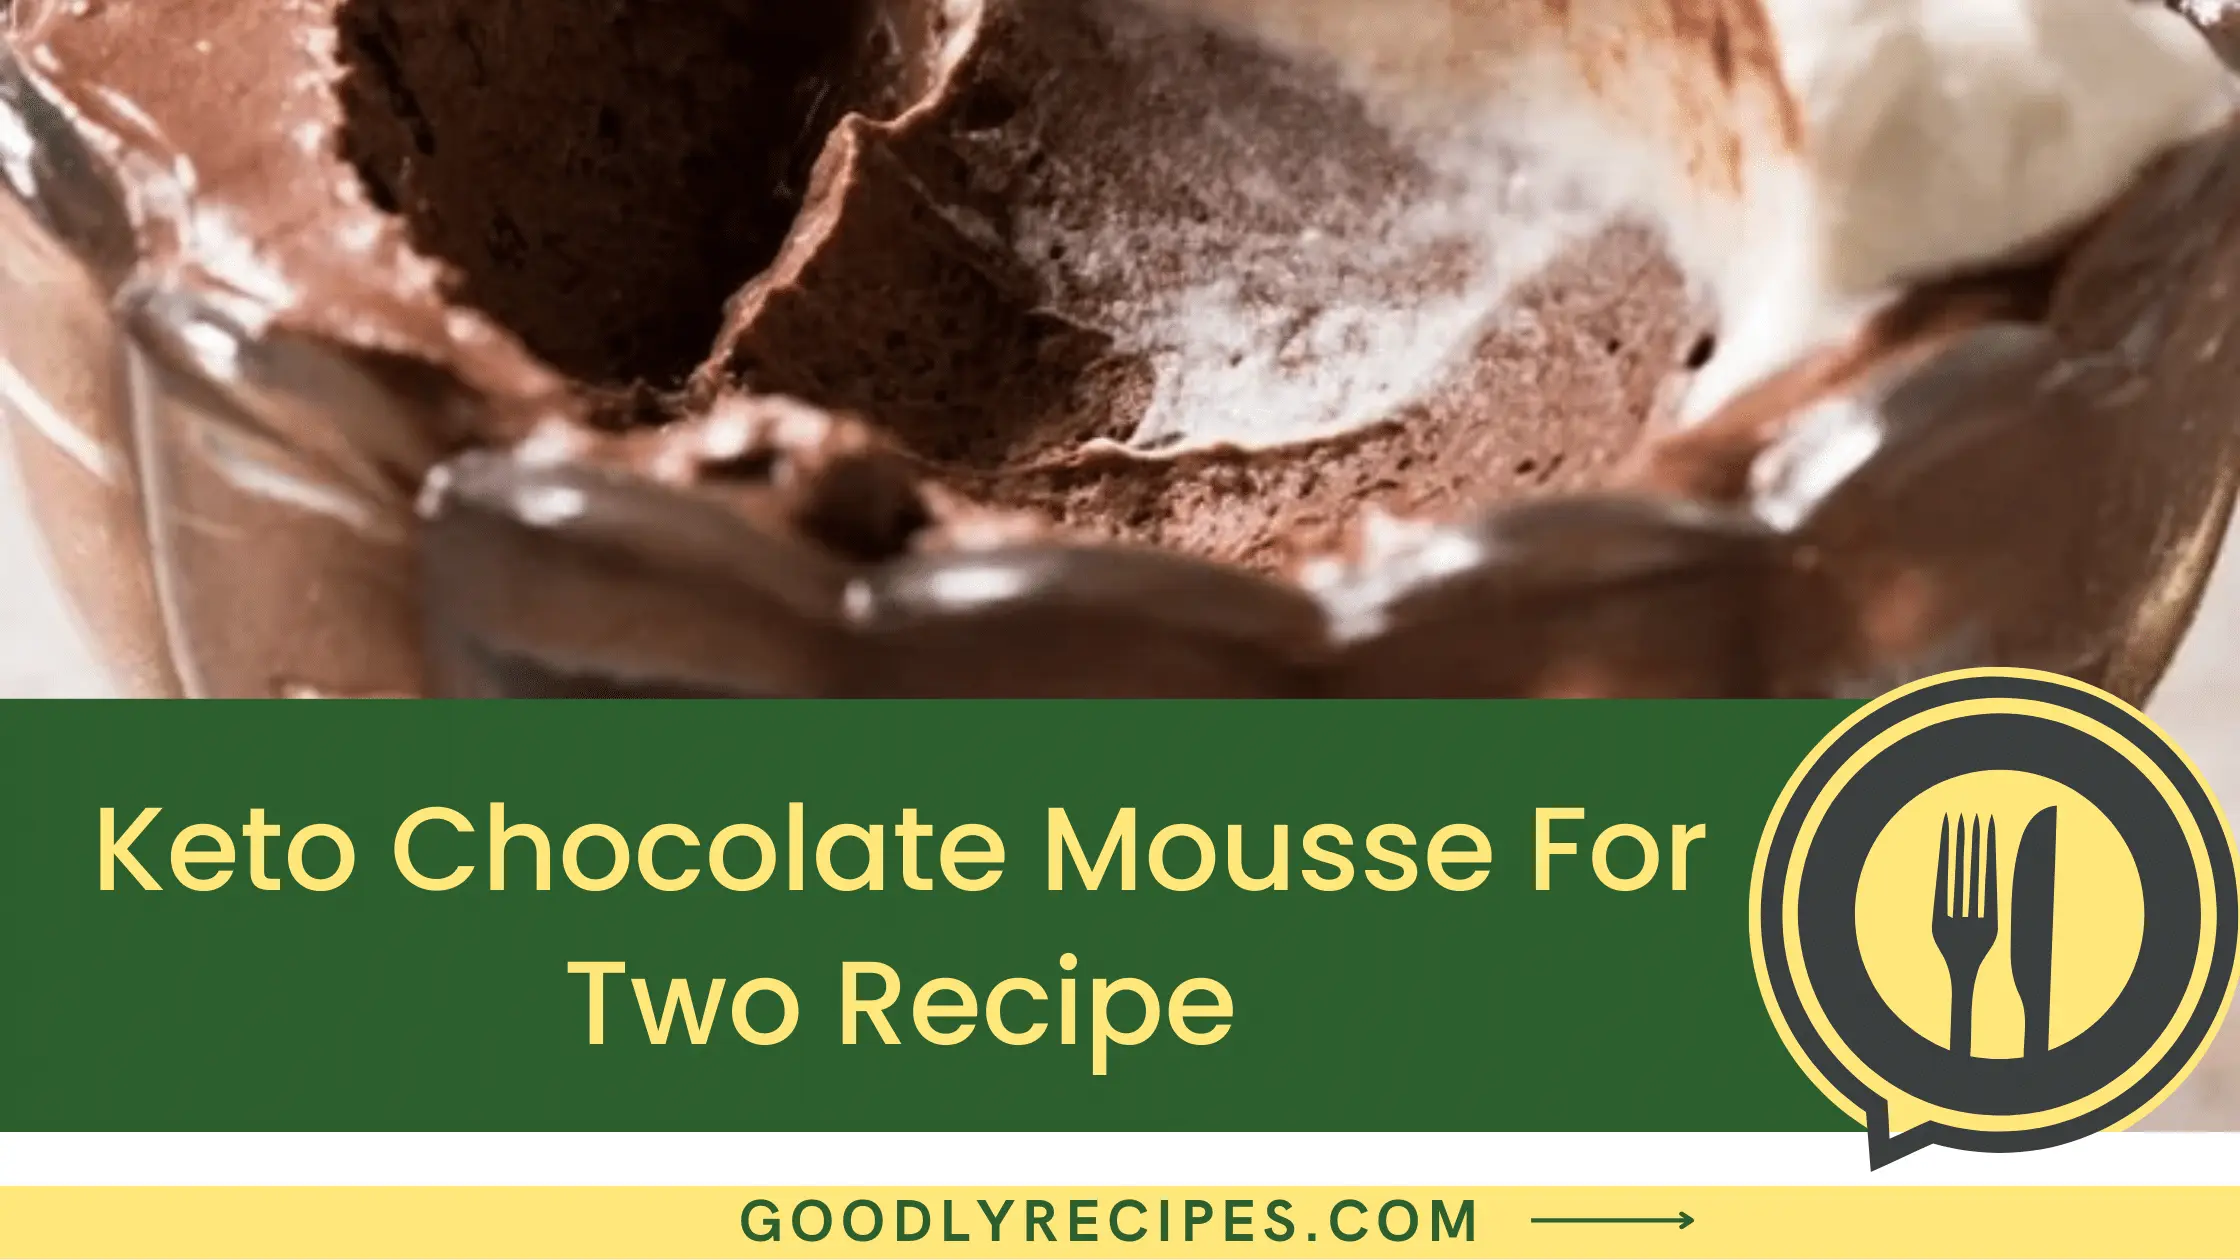 Keto Chocolate Mousse For Two Recipe